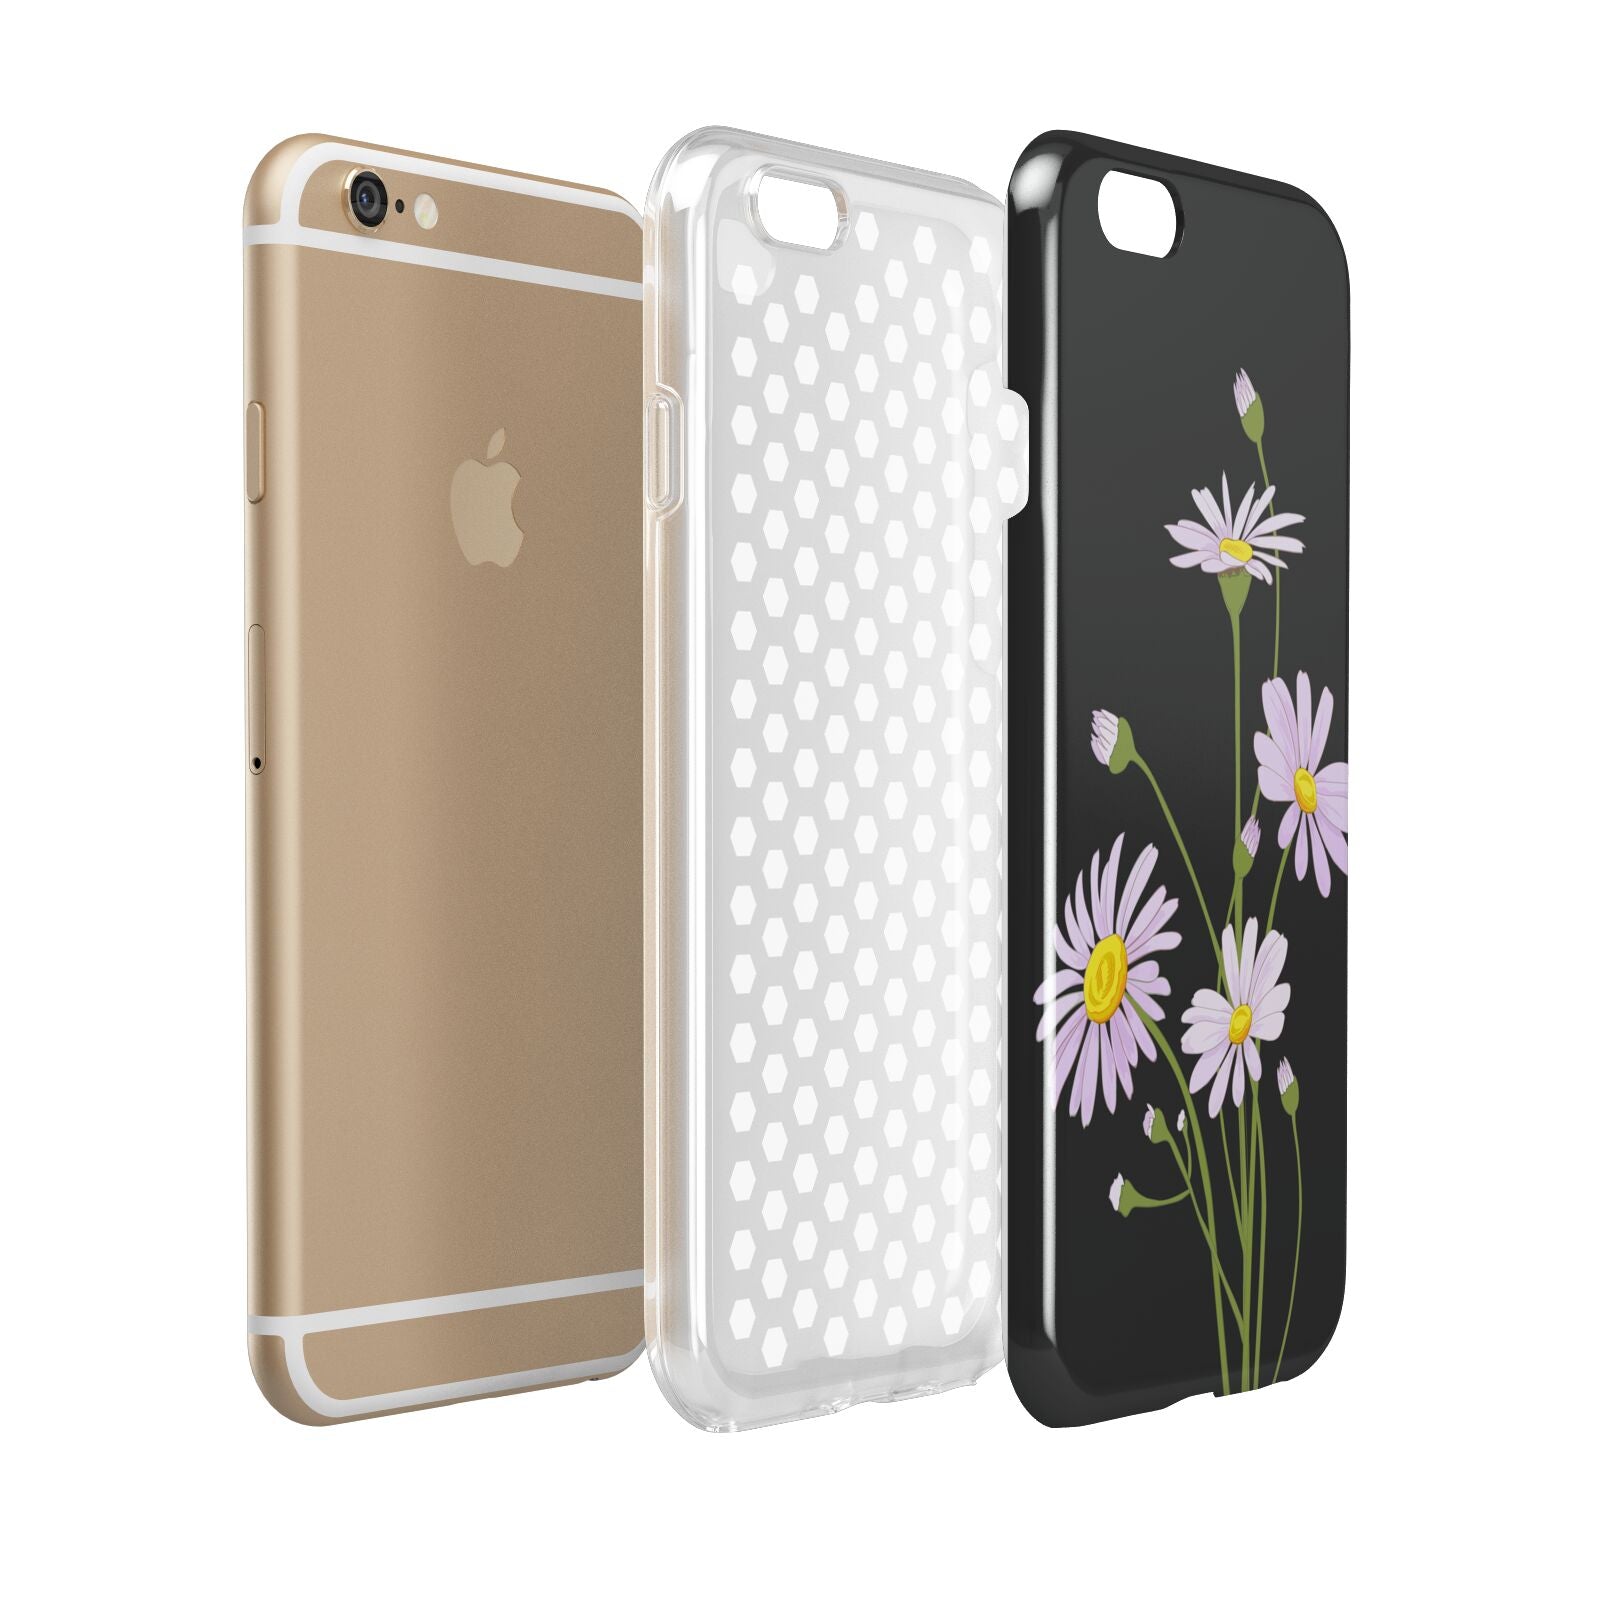 Wild Daisies Apple iPhone 6 3D Tough Case Expanded view